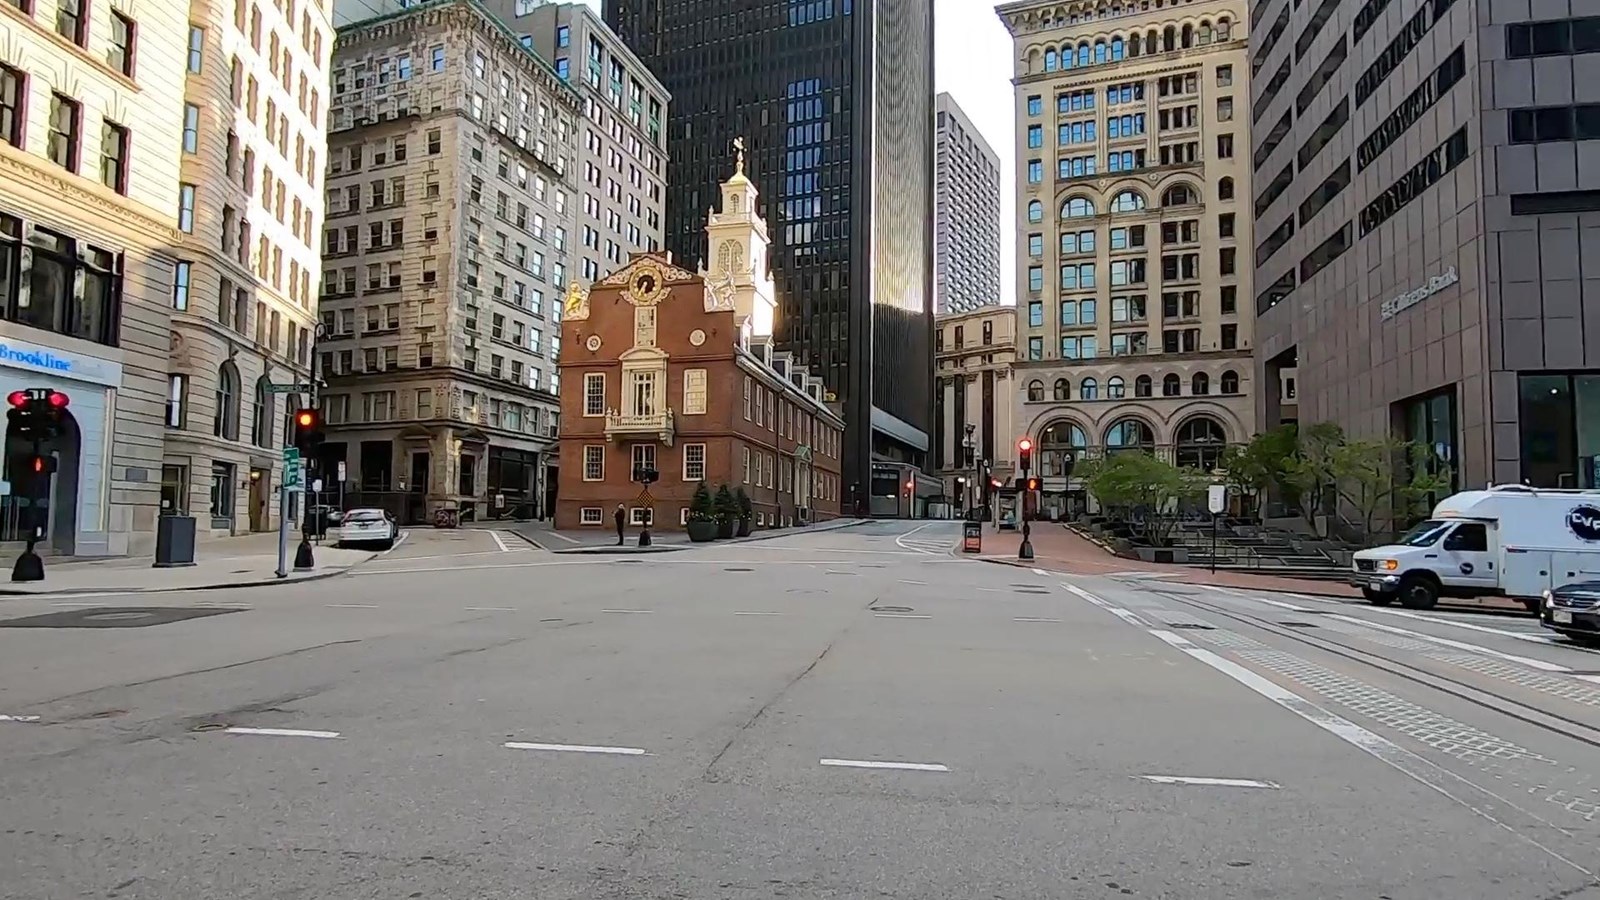 A large street intersection with the Old State House at the top of the street.